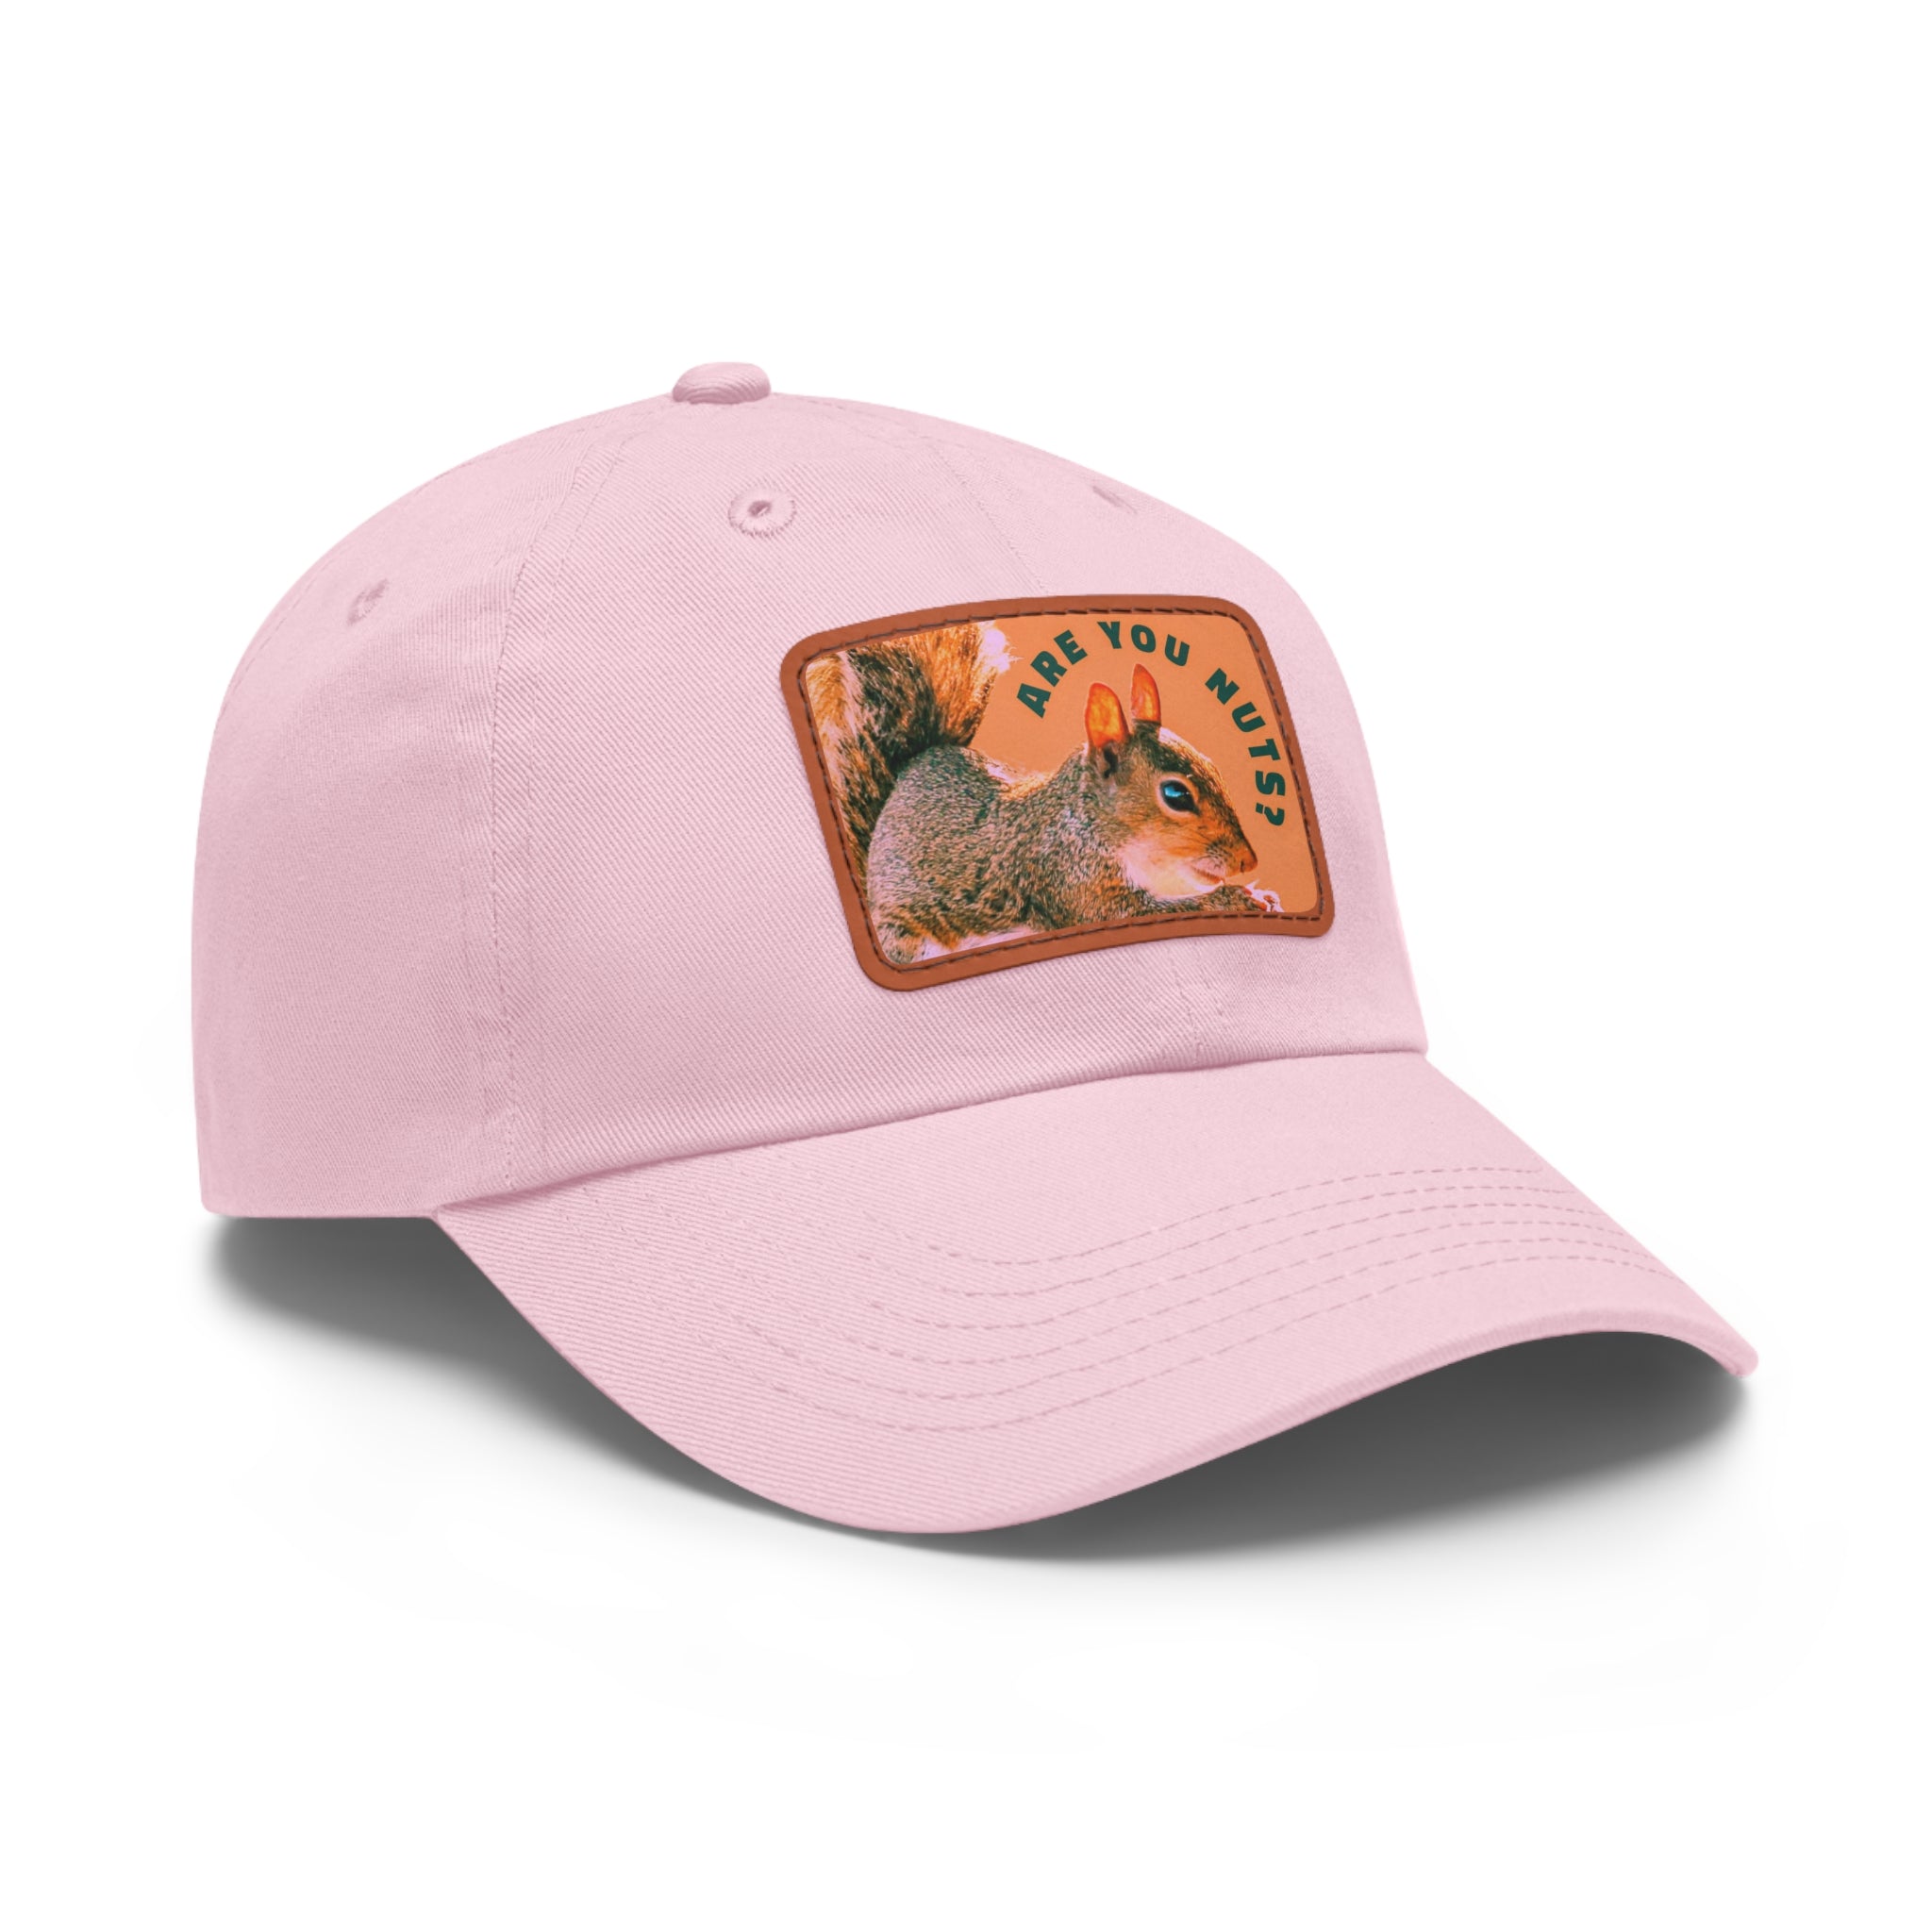 Are You Nuts? Squirrel Hat with Rectangular Leather Patch